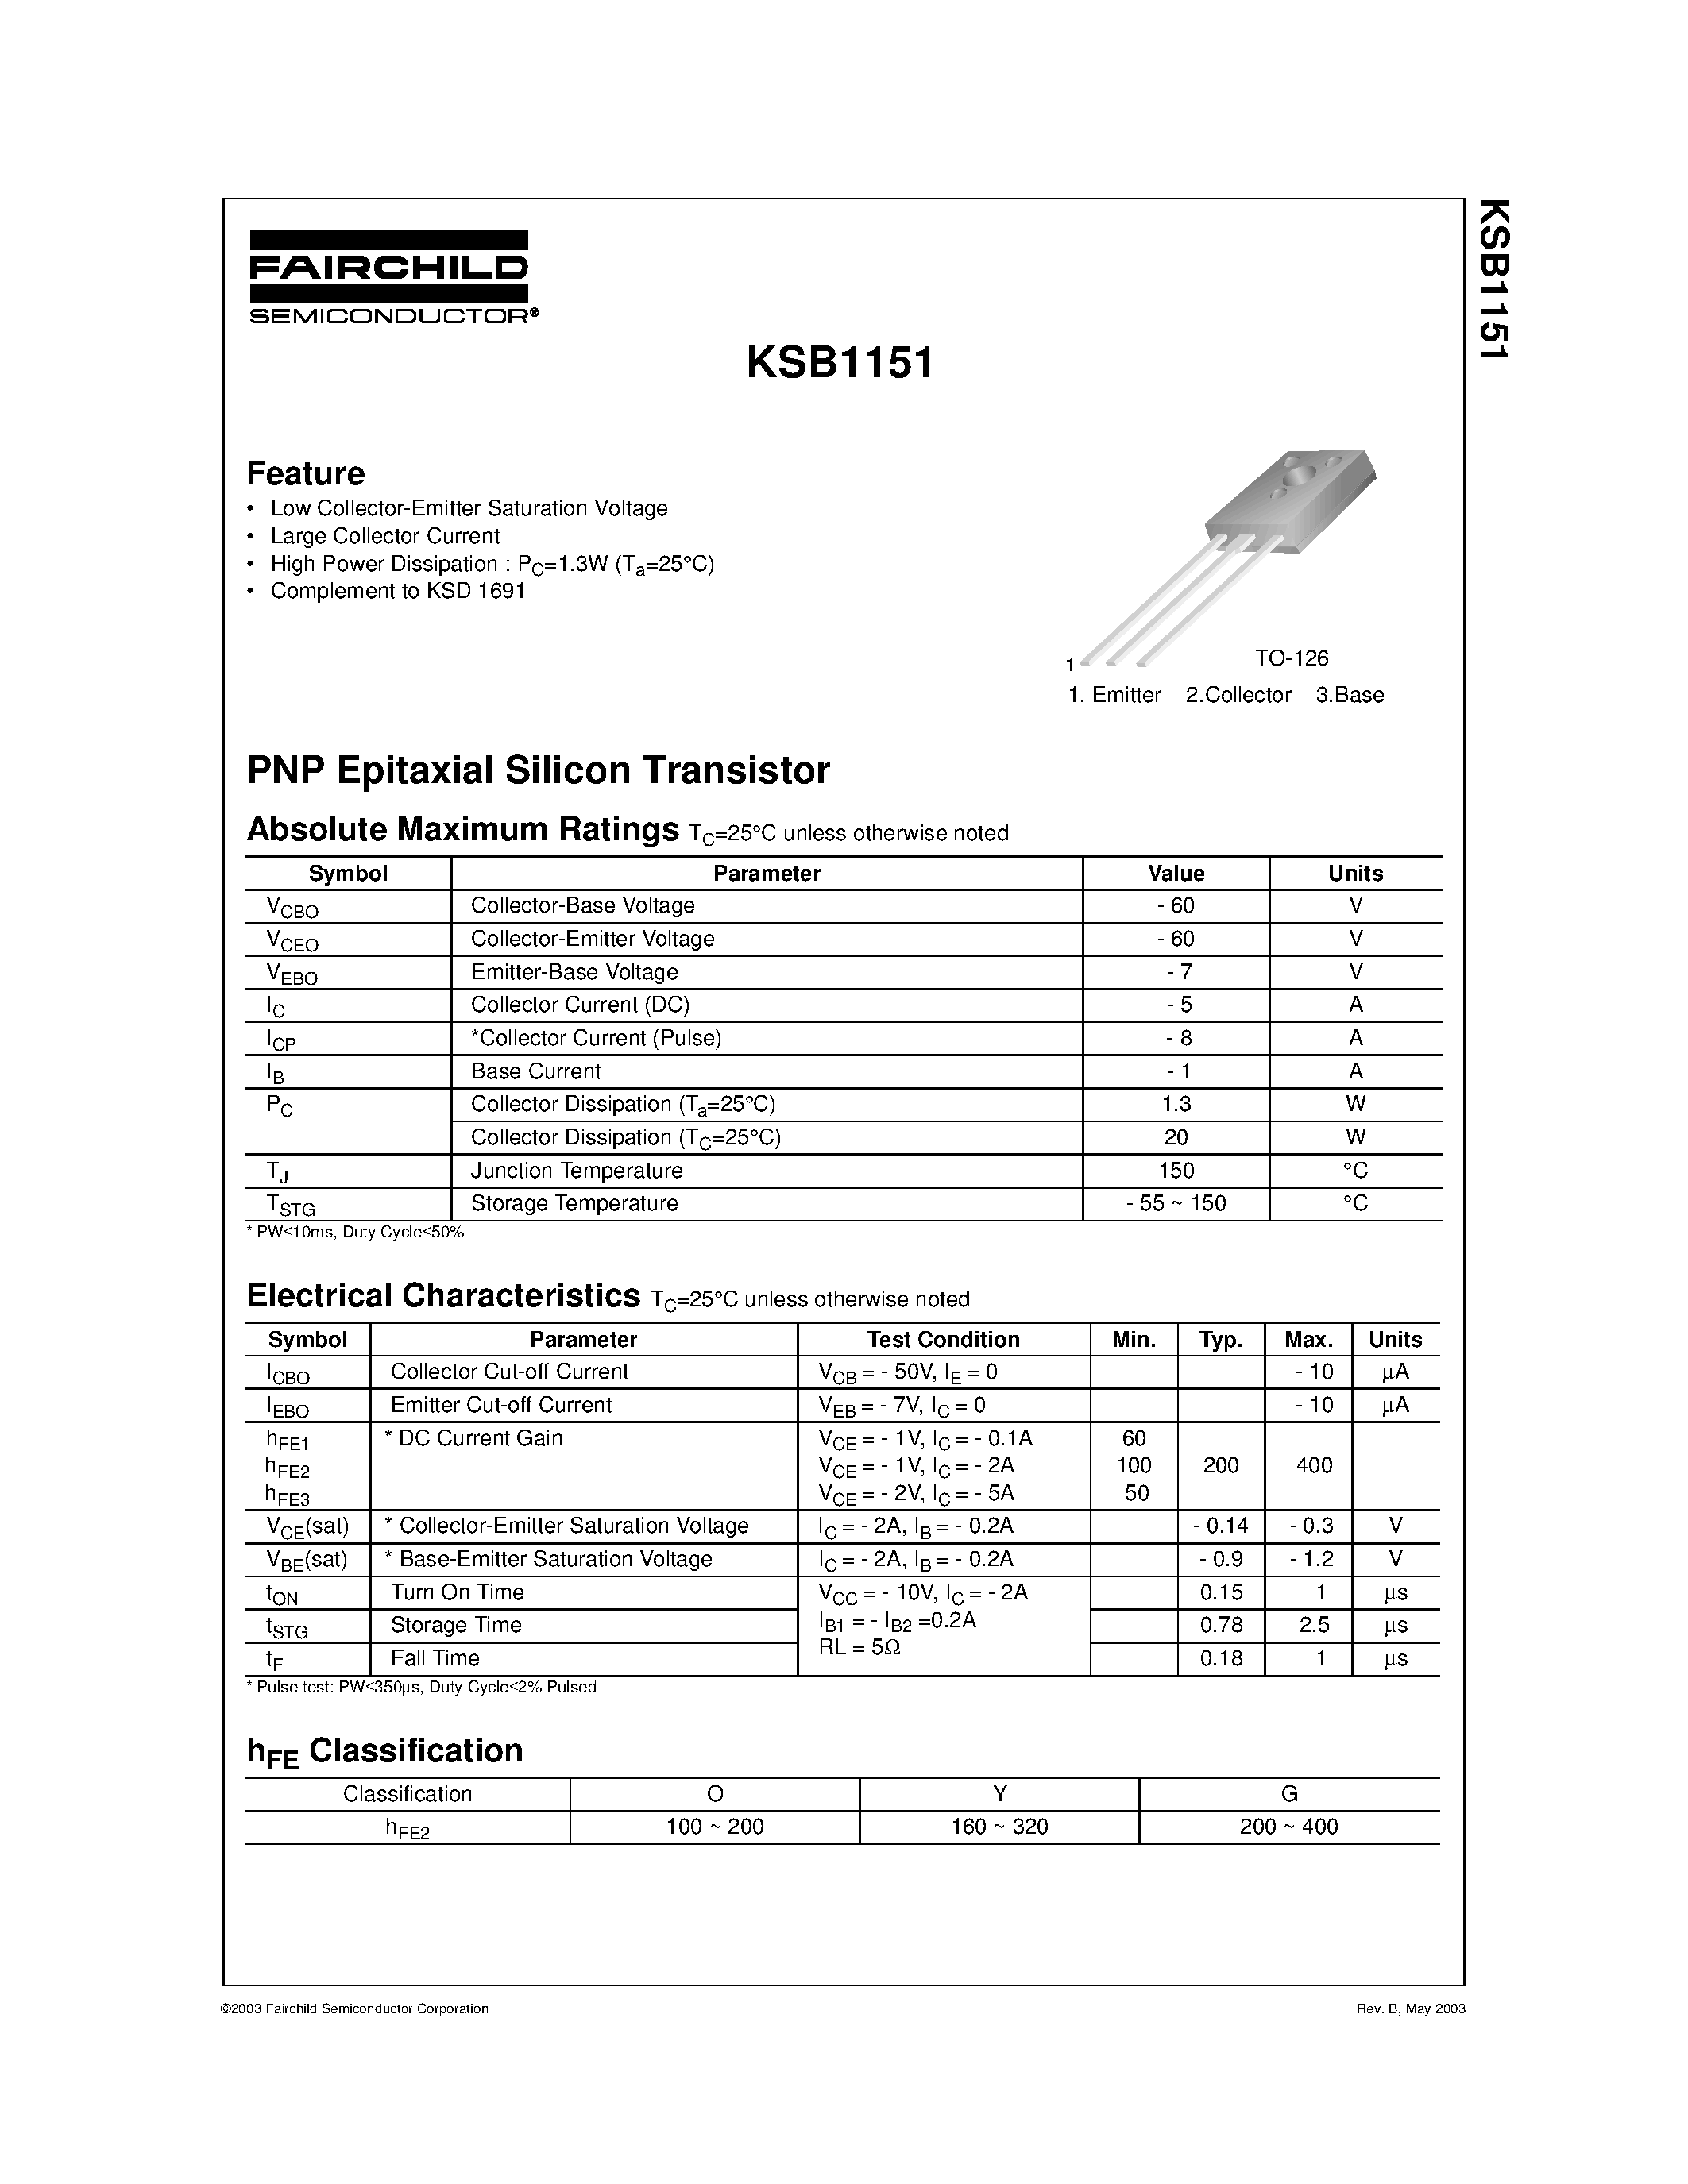 Datasheet KSB1151 - Low Collector-Emitter Saturation Voltage Large Collector Current page 1